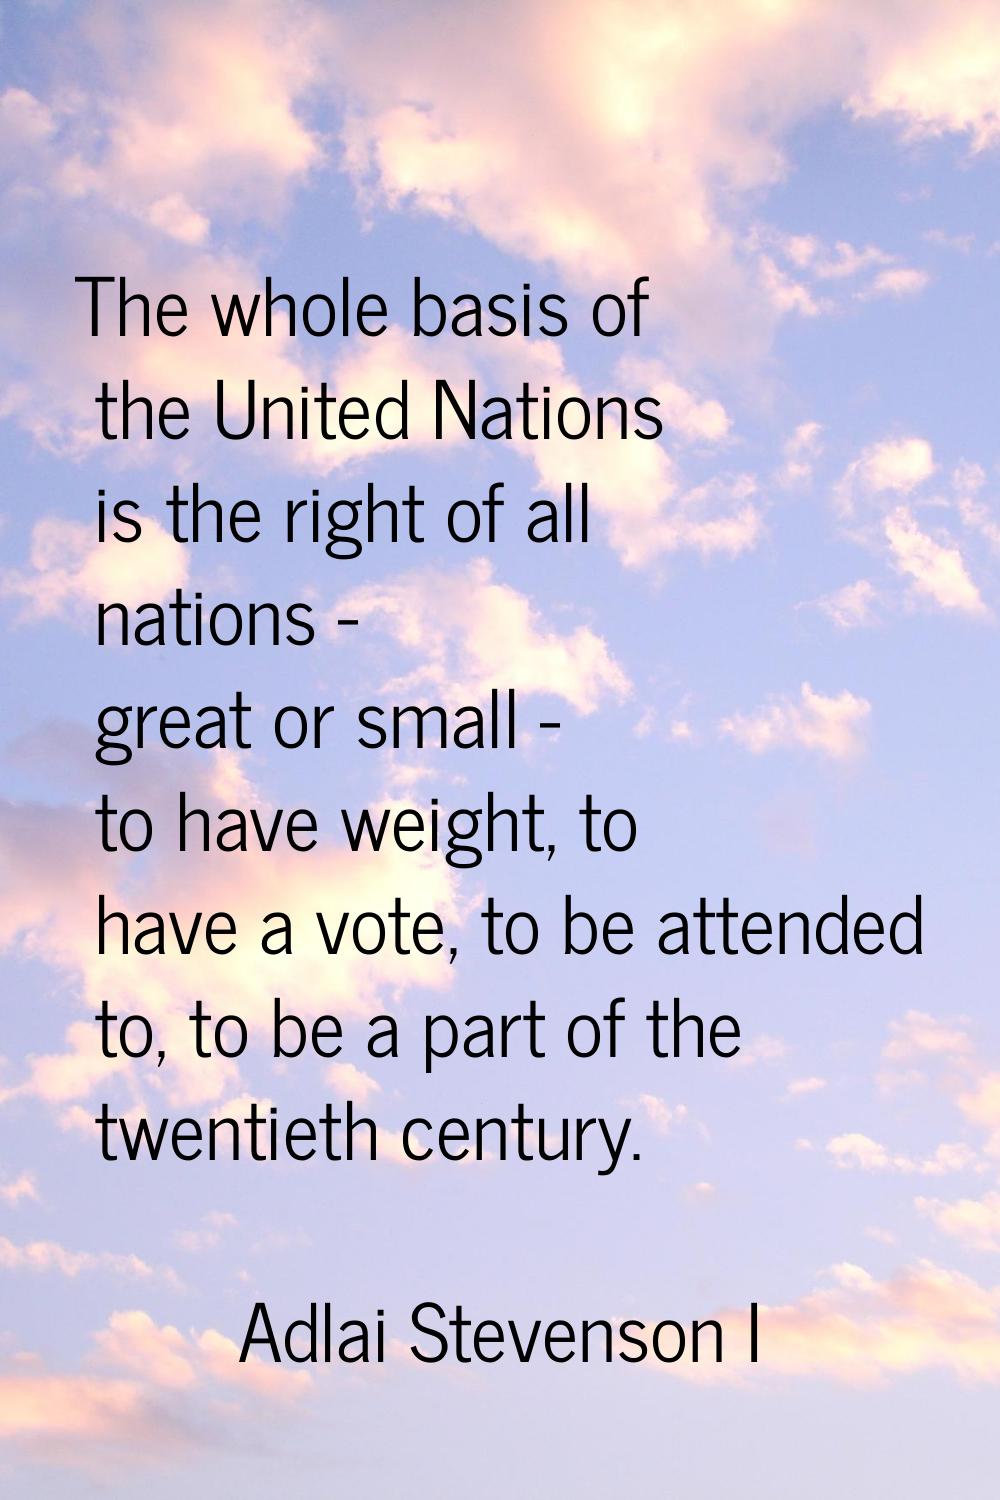 The whole basis of the United Nations is the right of all nations - great or small - to have weight